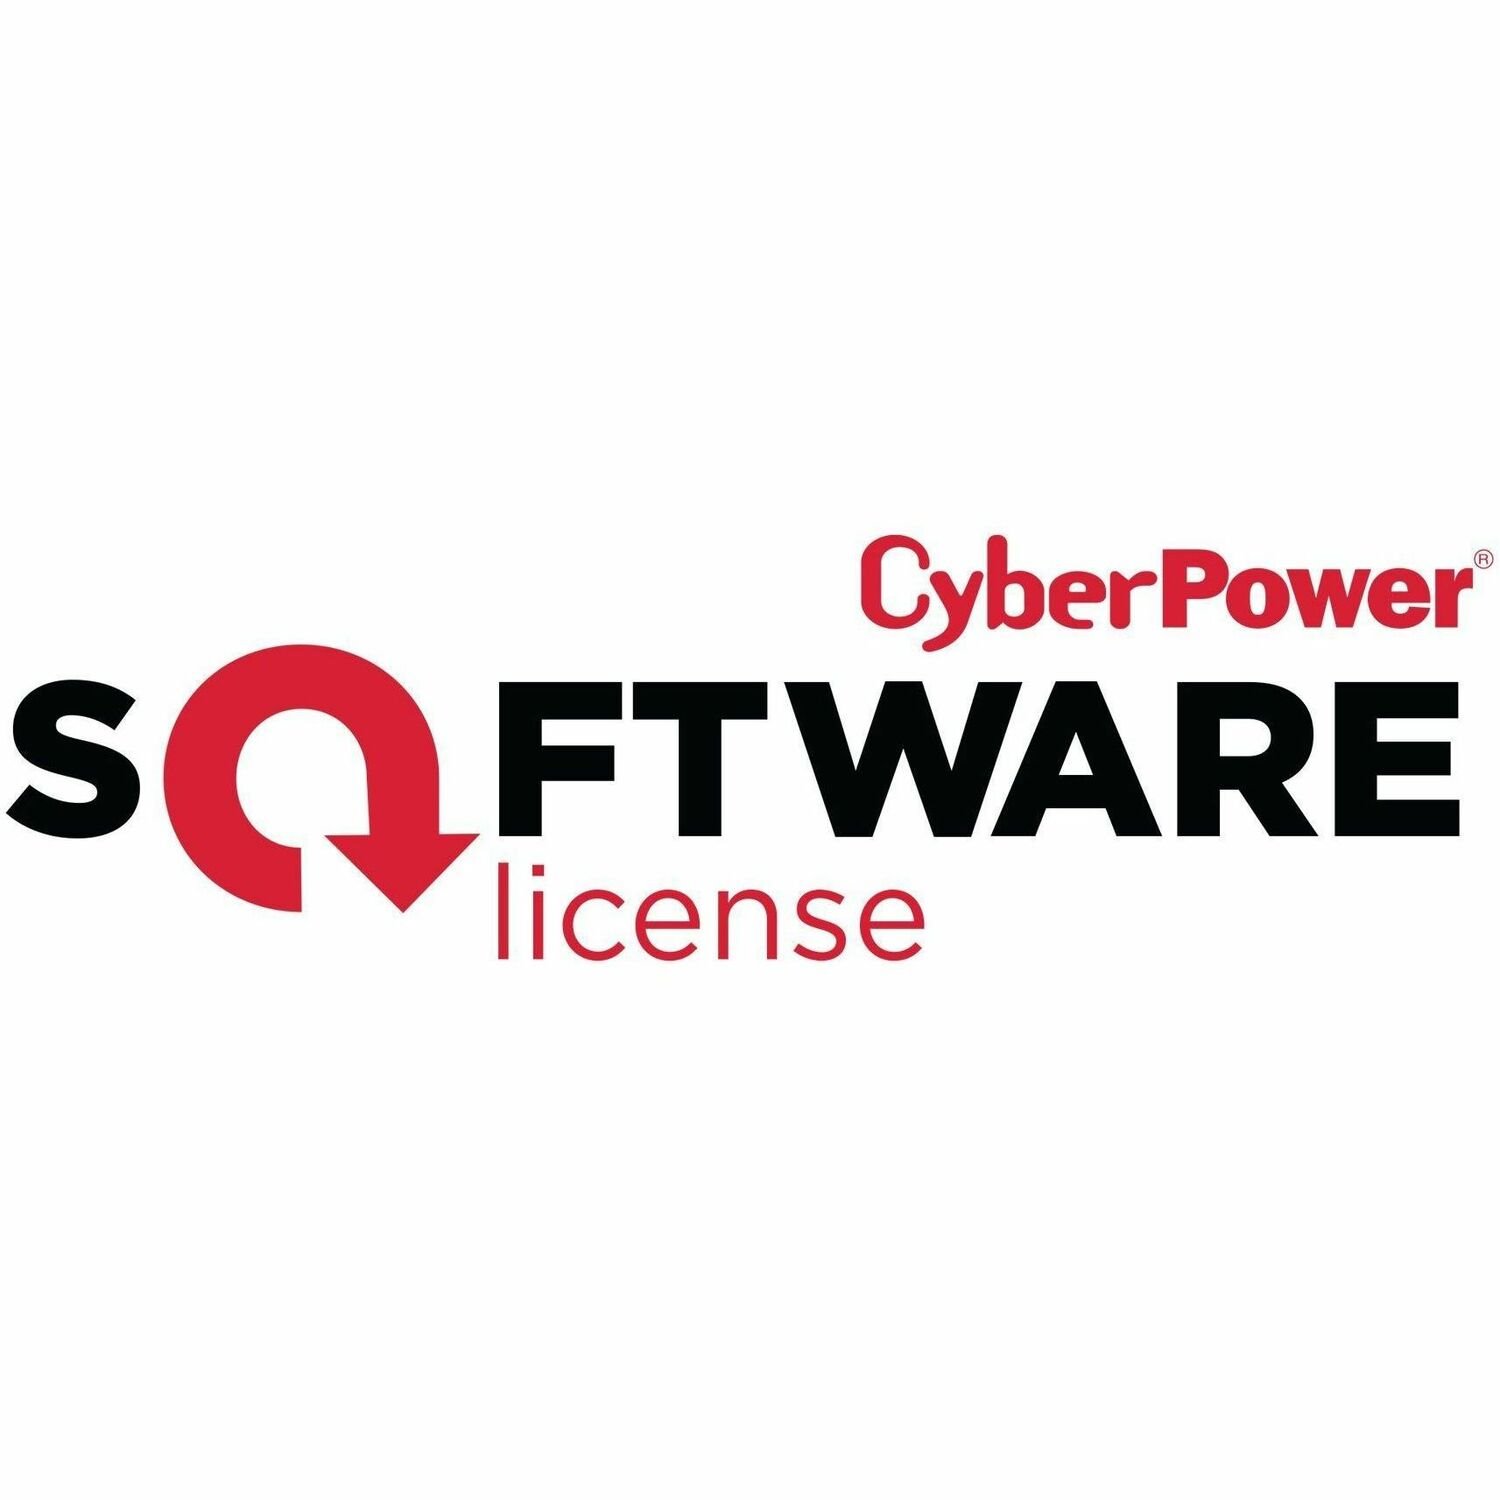 CyberPower PowerPanel Cloud Software - License - 100 Node (UPS) License, Up to 50 Separate Group, Up to 25 Email Addresses, 150 Event Log Record, 1500 Status Log Record - 1 Year